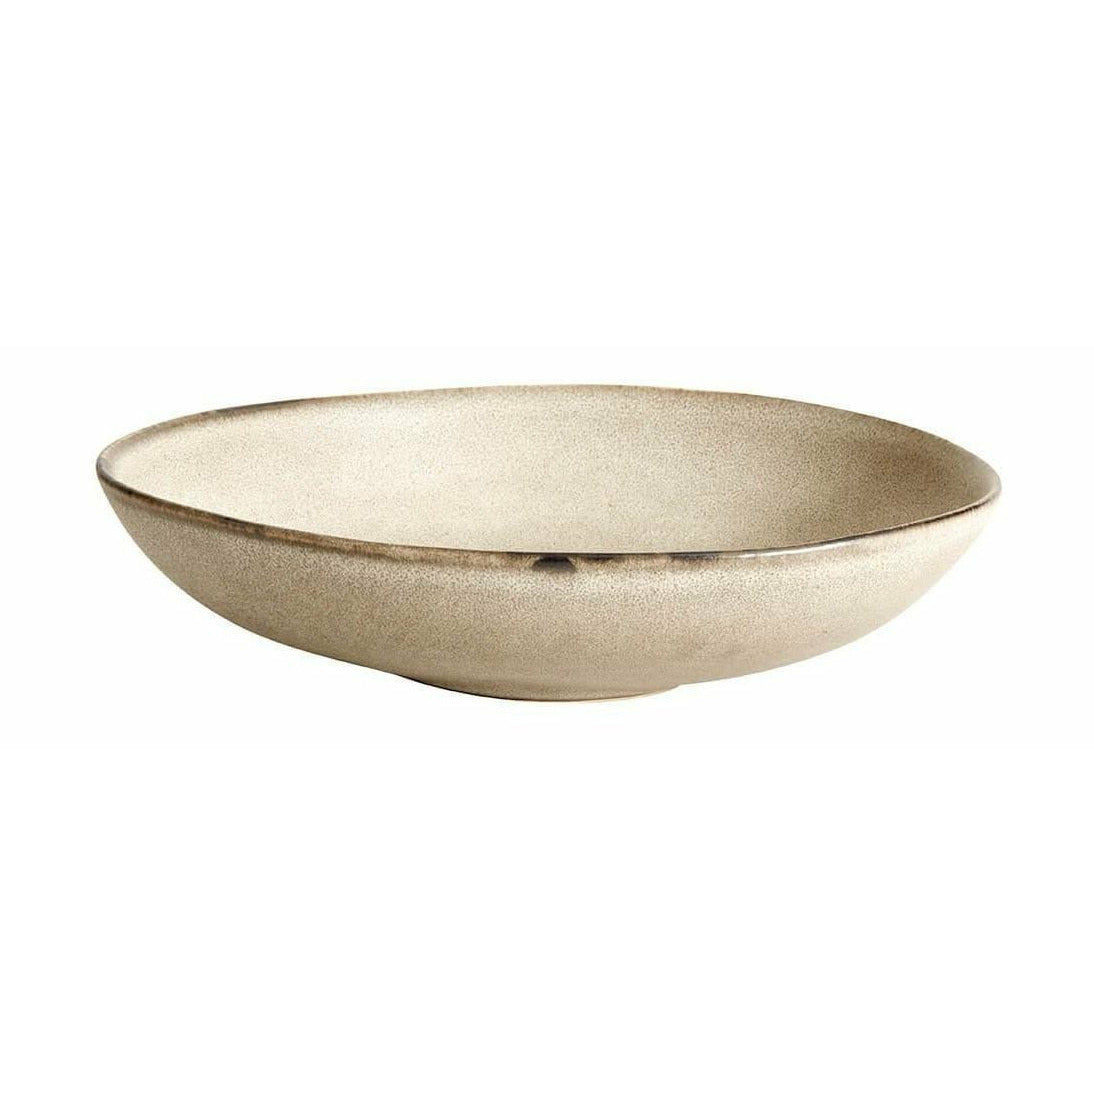 Muubs Mame Serving Bowl Oyster, 19 cm